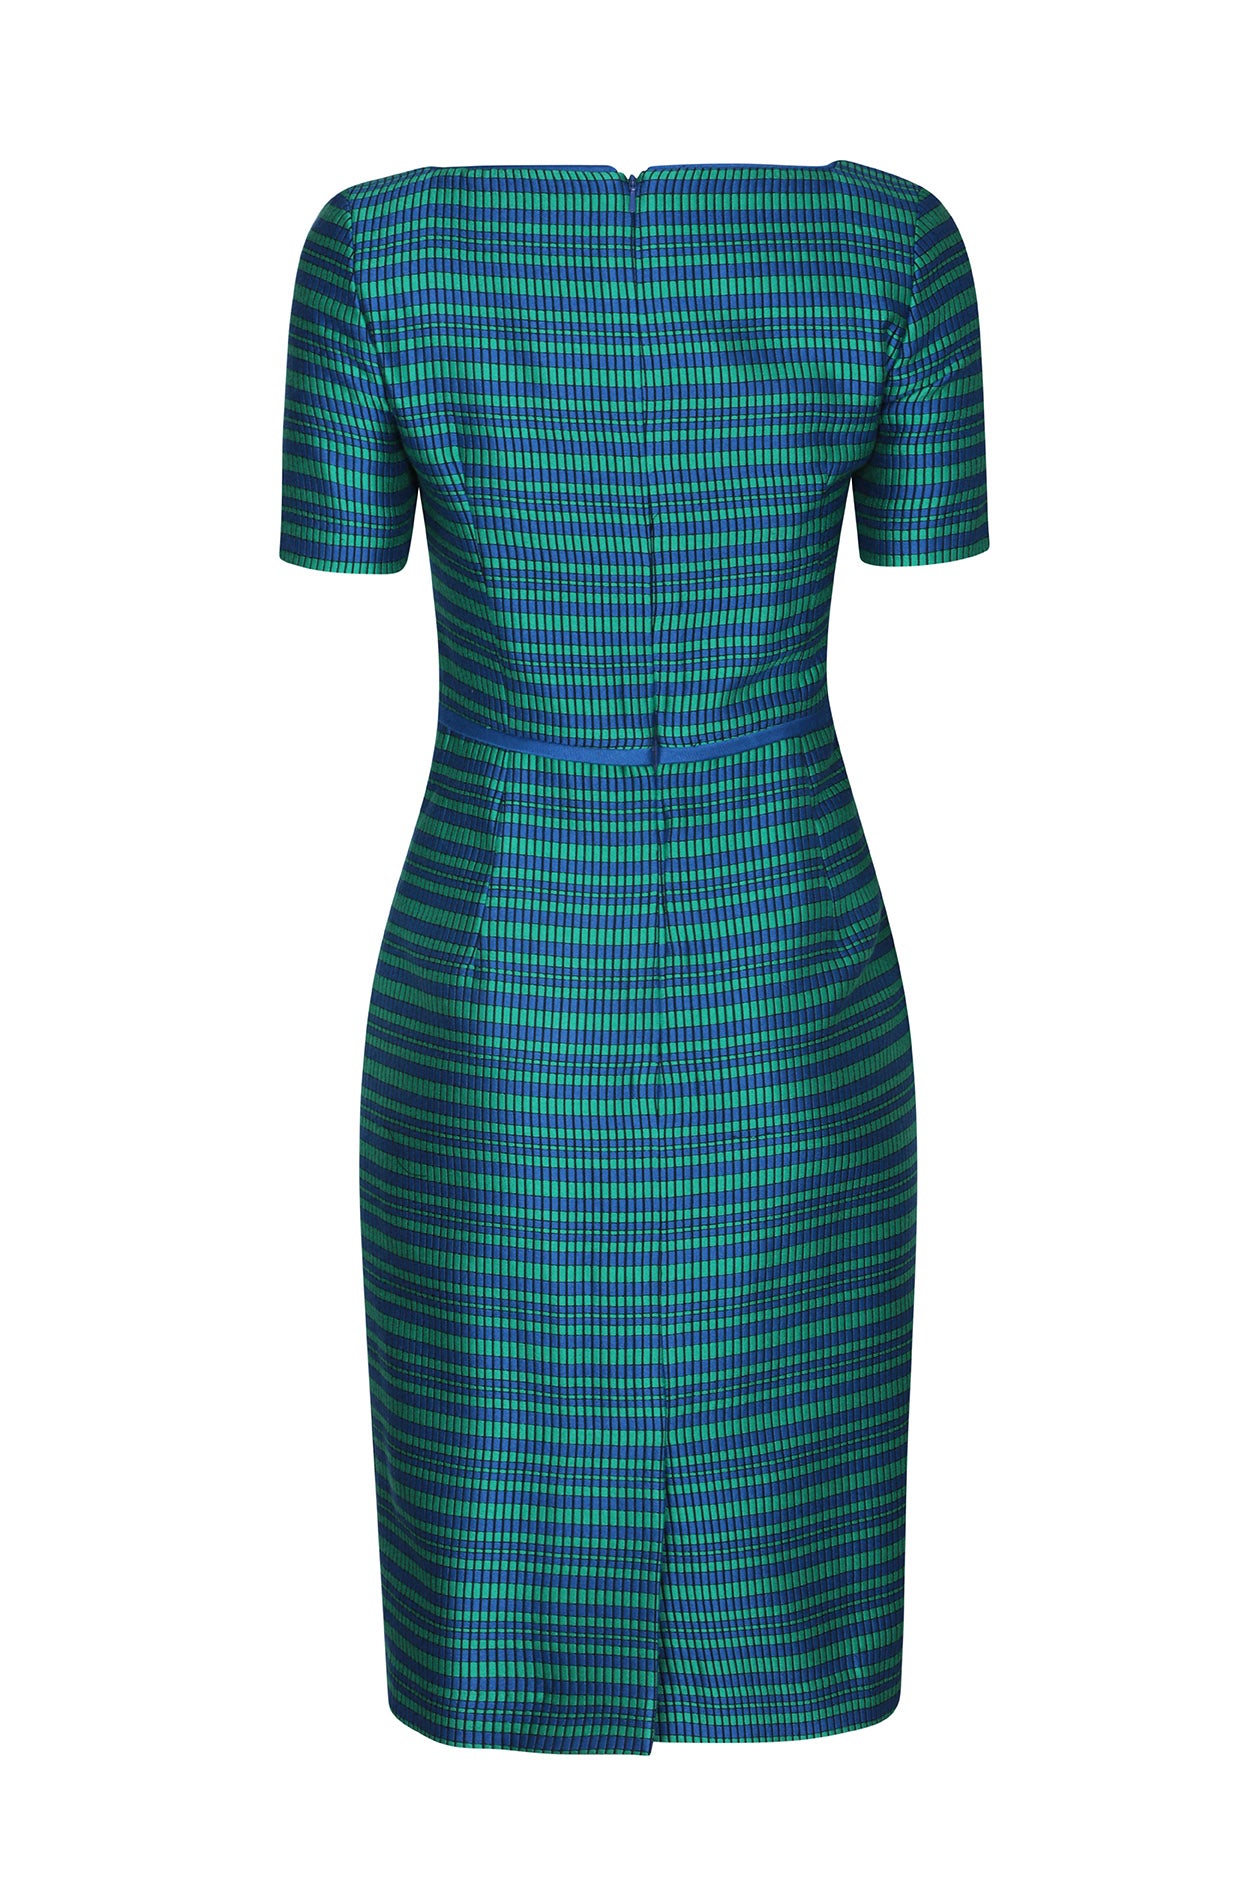 Shift Dress in Blue/Green Viscose Check with Square Neck and Piping Detail - Alexa